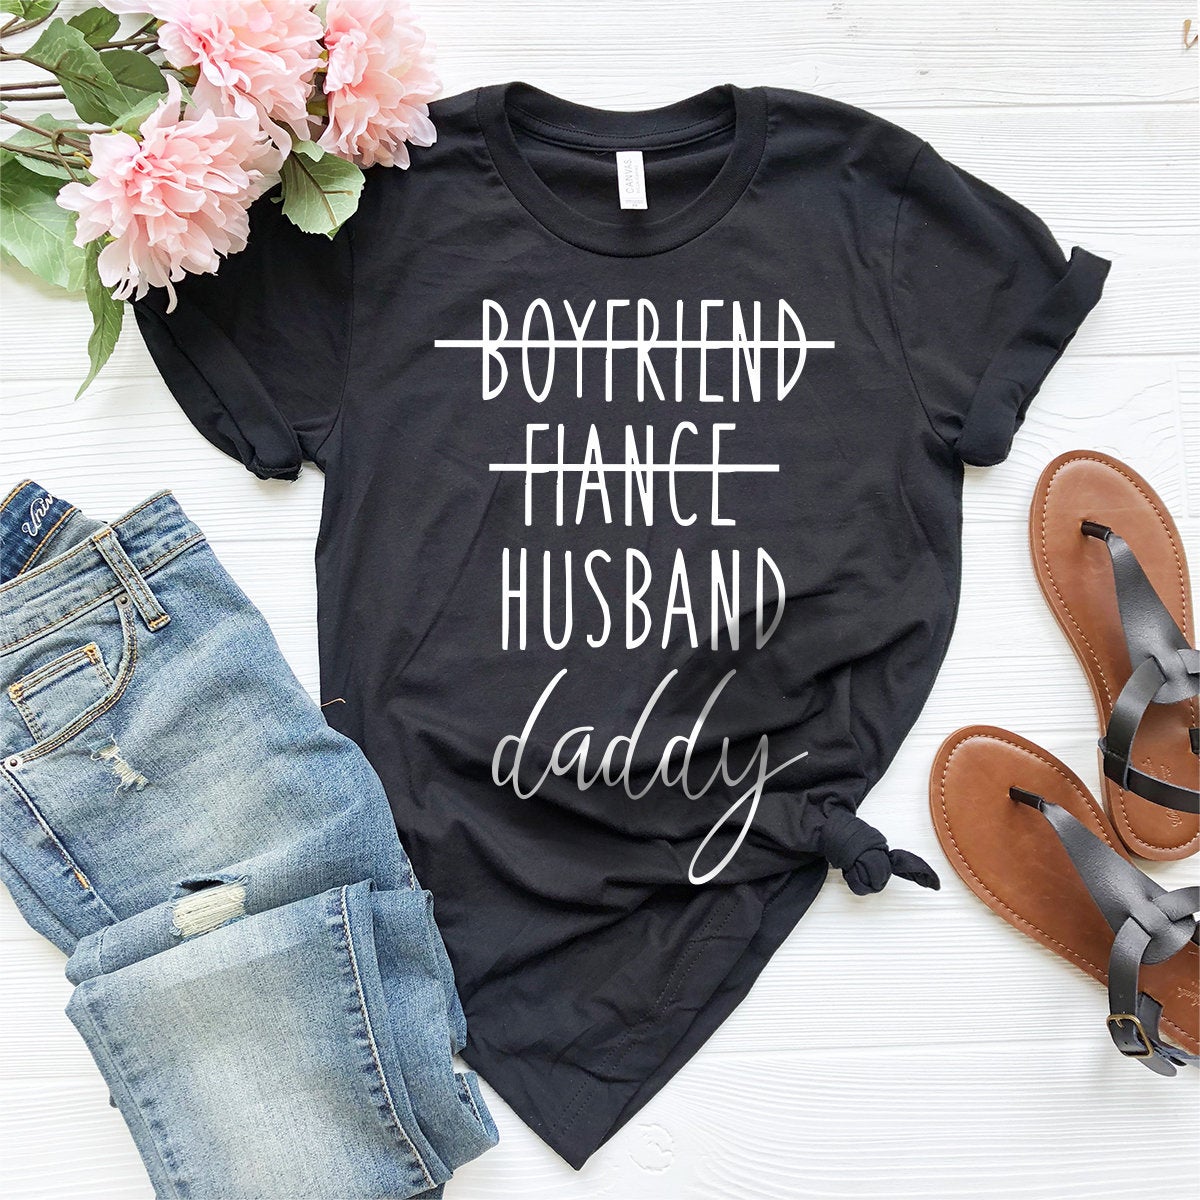 New Dad New Mom Shirt, New Parents Gift, Pregnancy Announcement Shirt, Husband Daddy Wife Mommy Shirt, Matching Parents Shirt - Fastdeliverytees.com